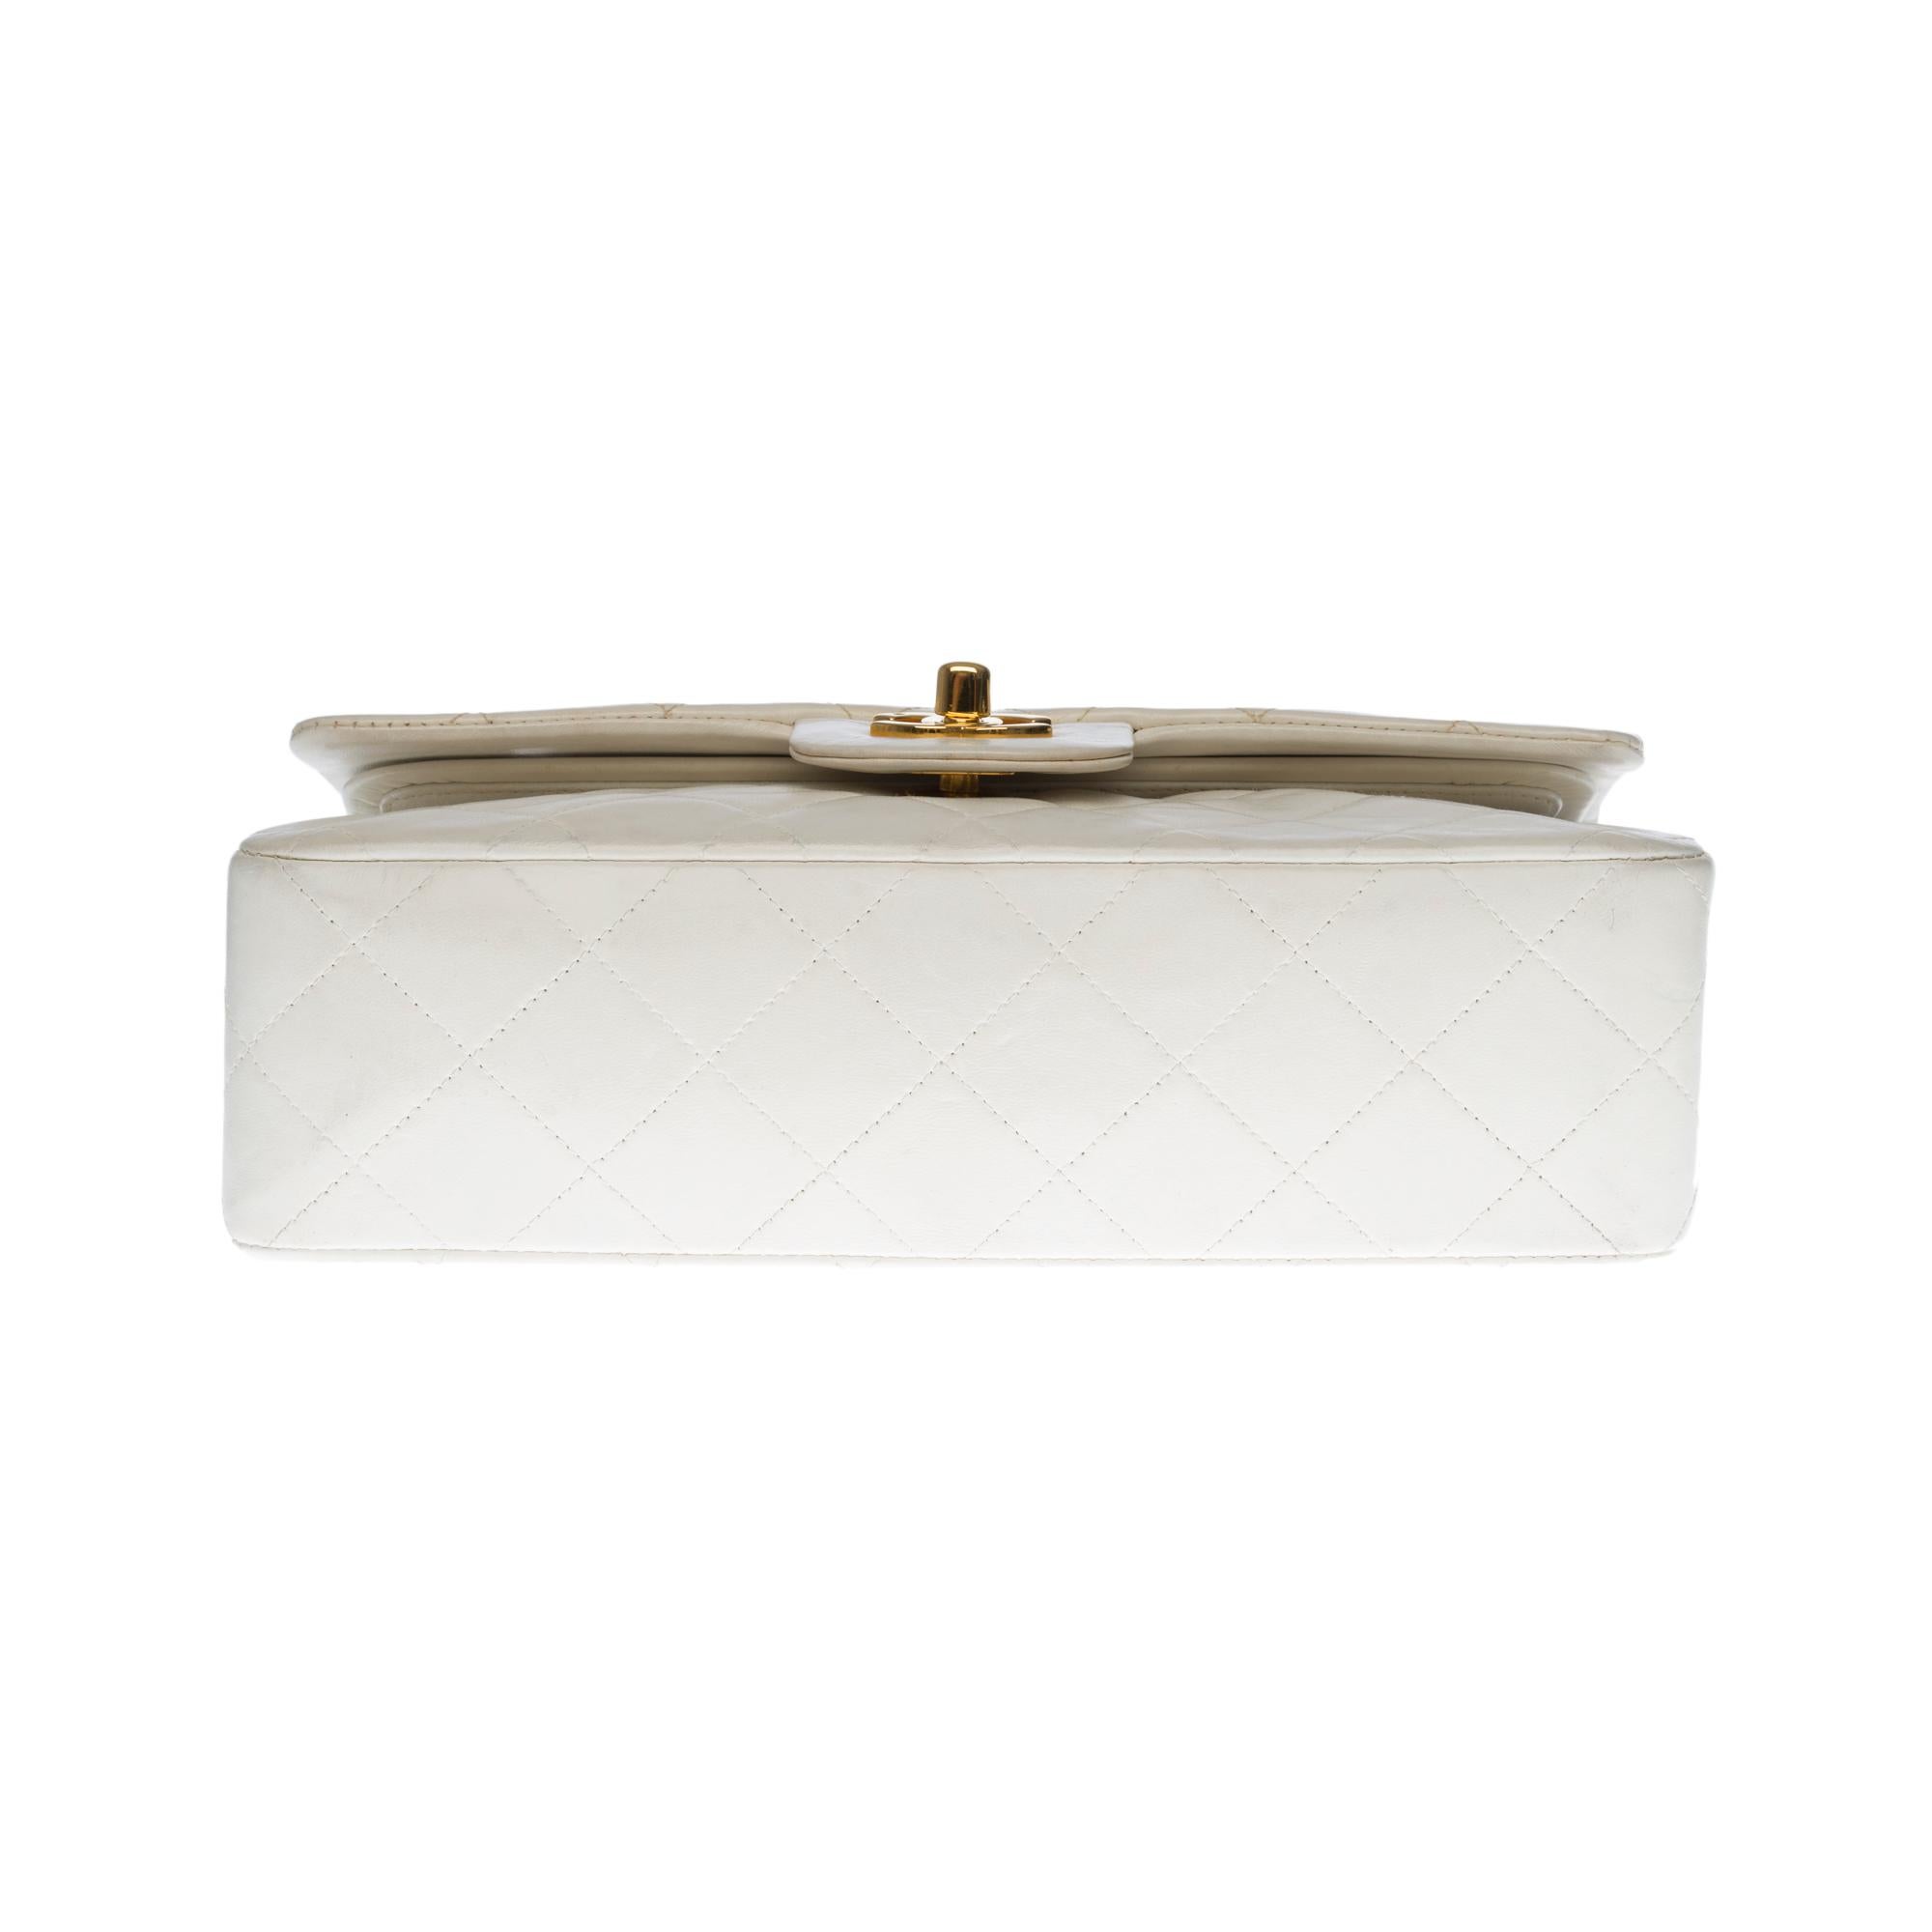 Chanel Timeless 23cm double flap Shoulder bag in White quilted lambskin, GHW 2